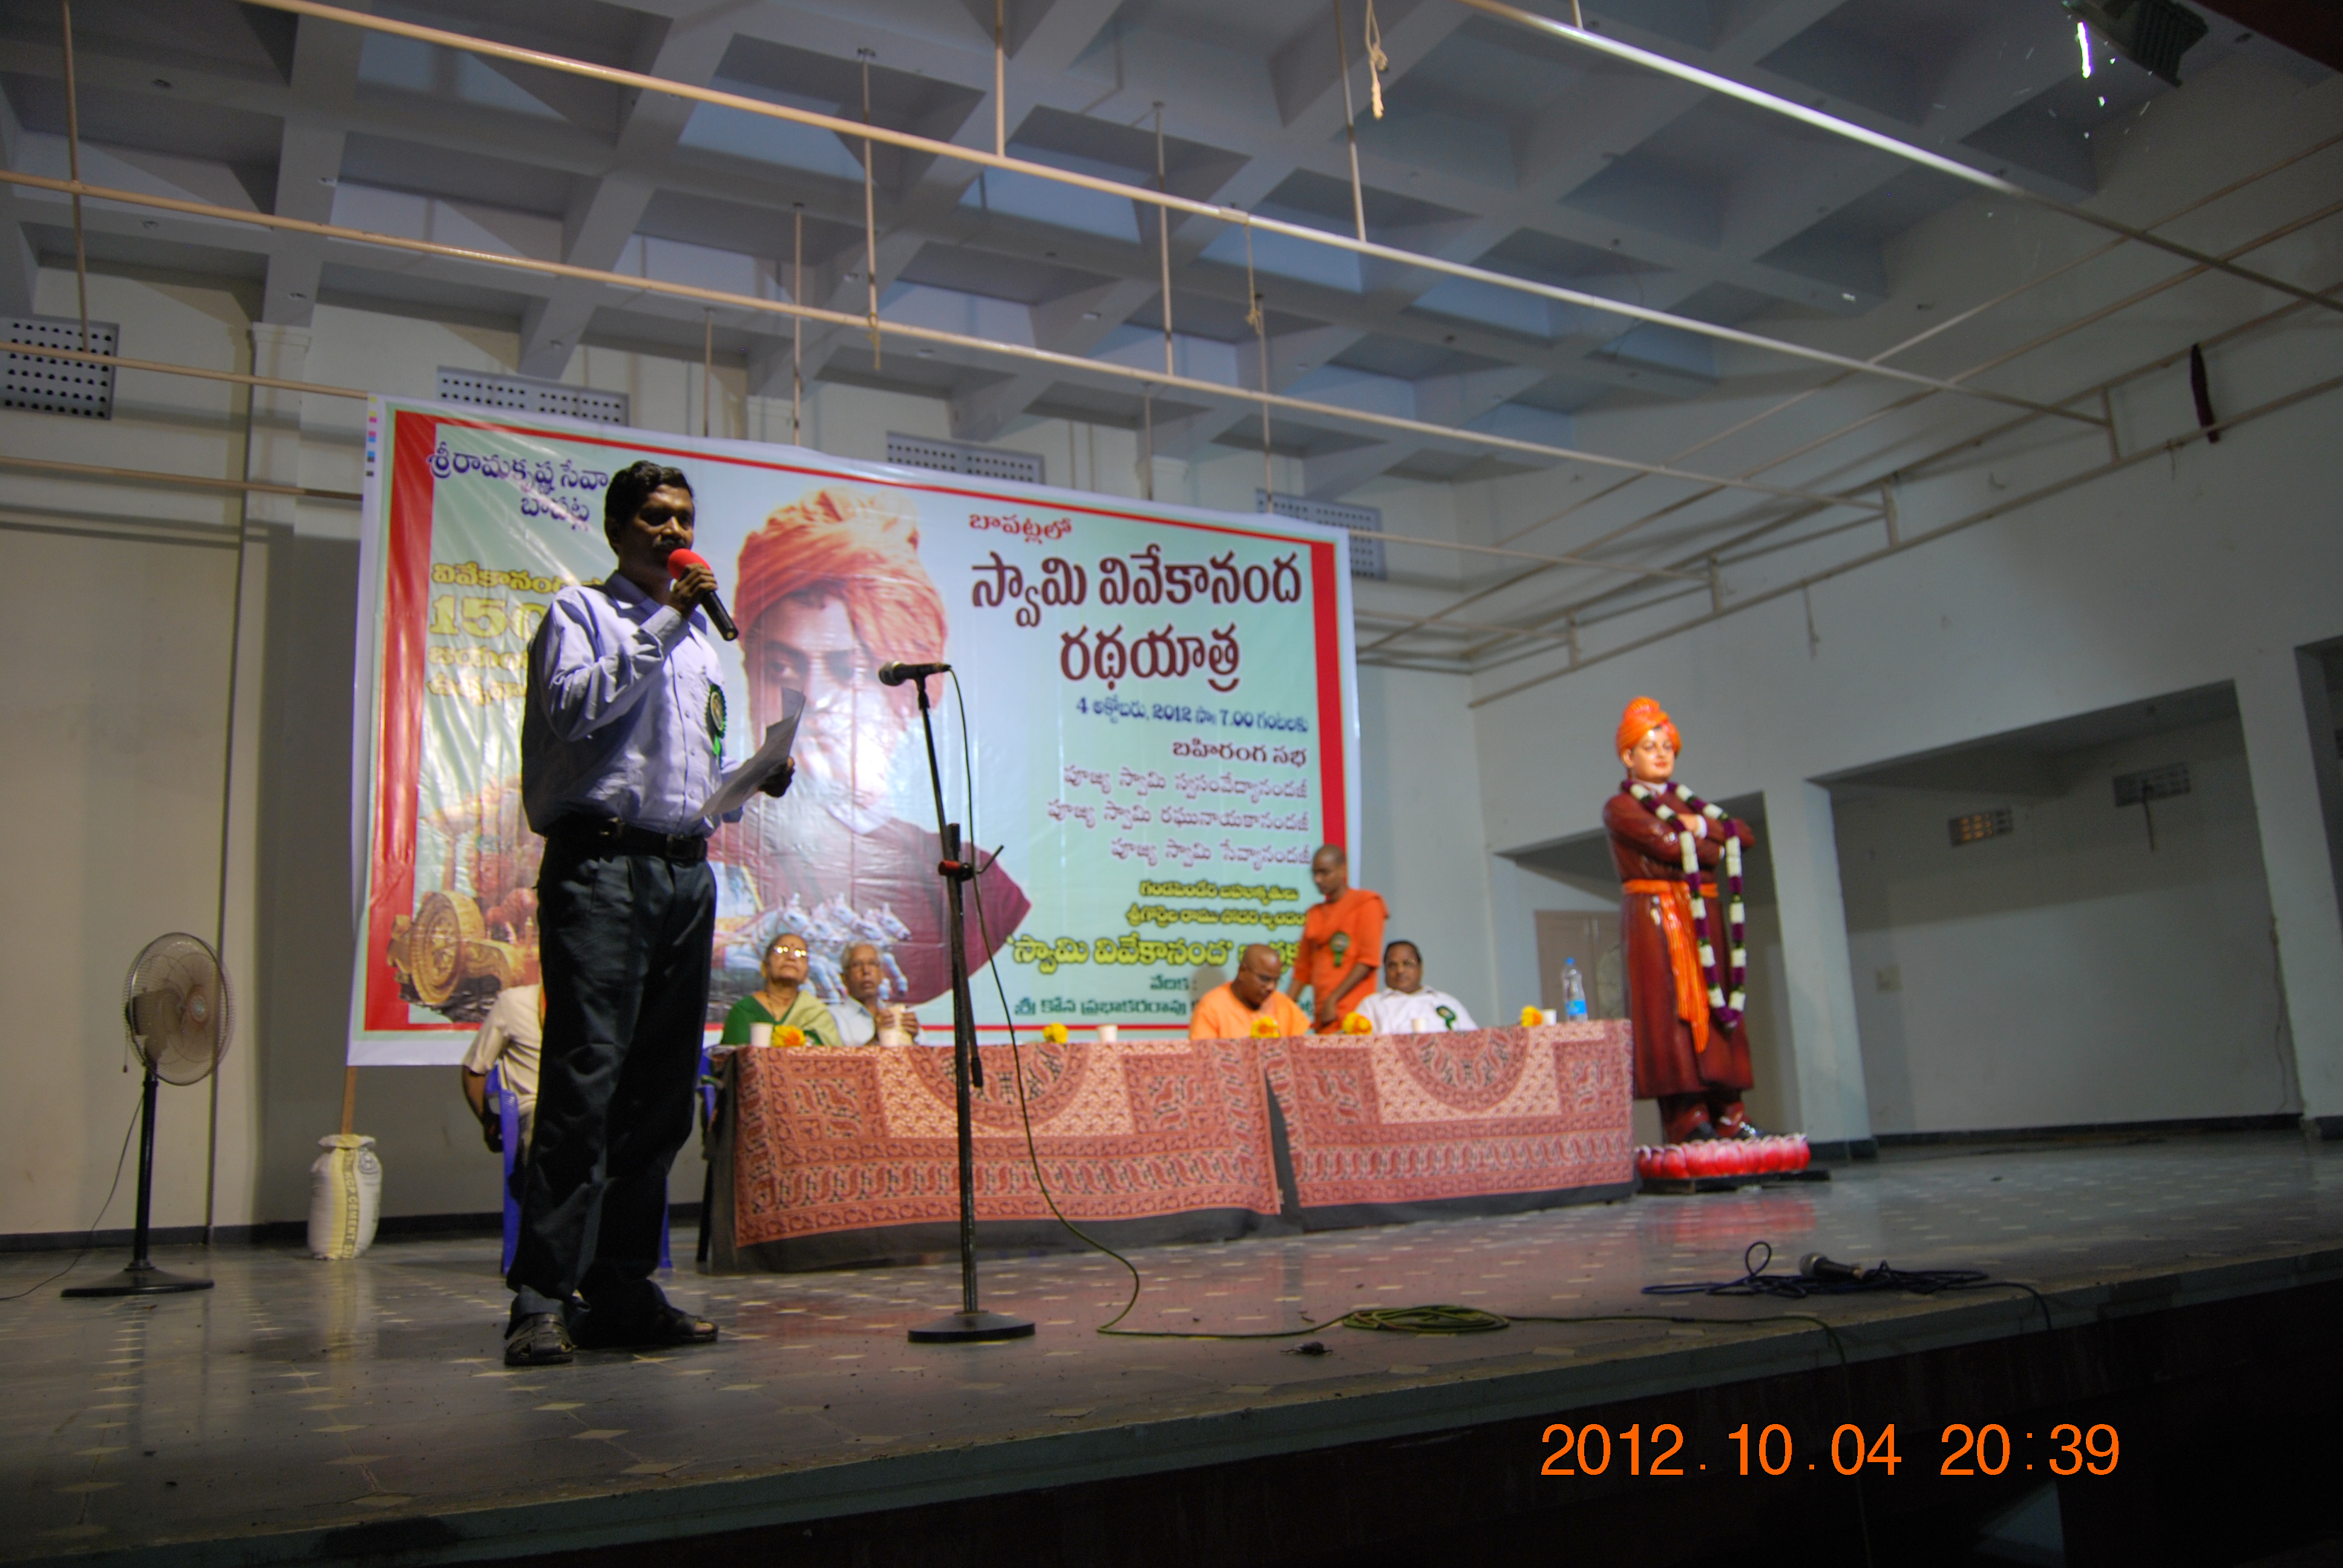 Dr. N. Ramagopal giving the vote of thanks